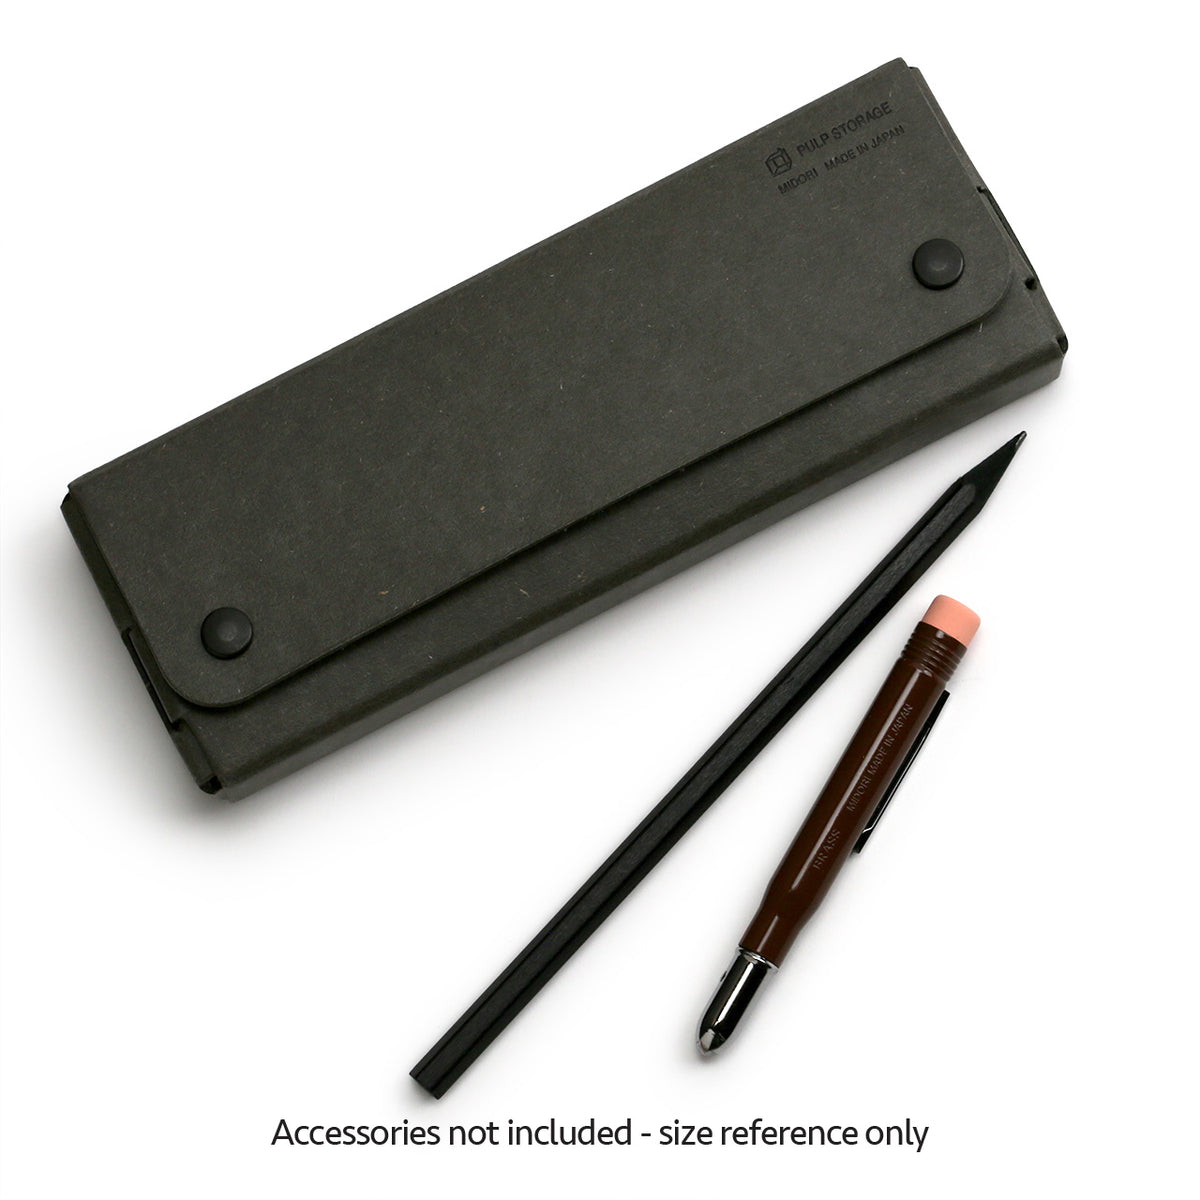 black peencil case shown with two pencils for size reference